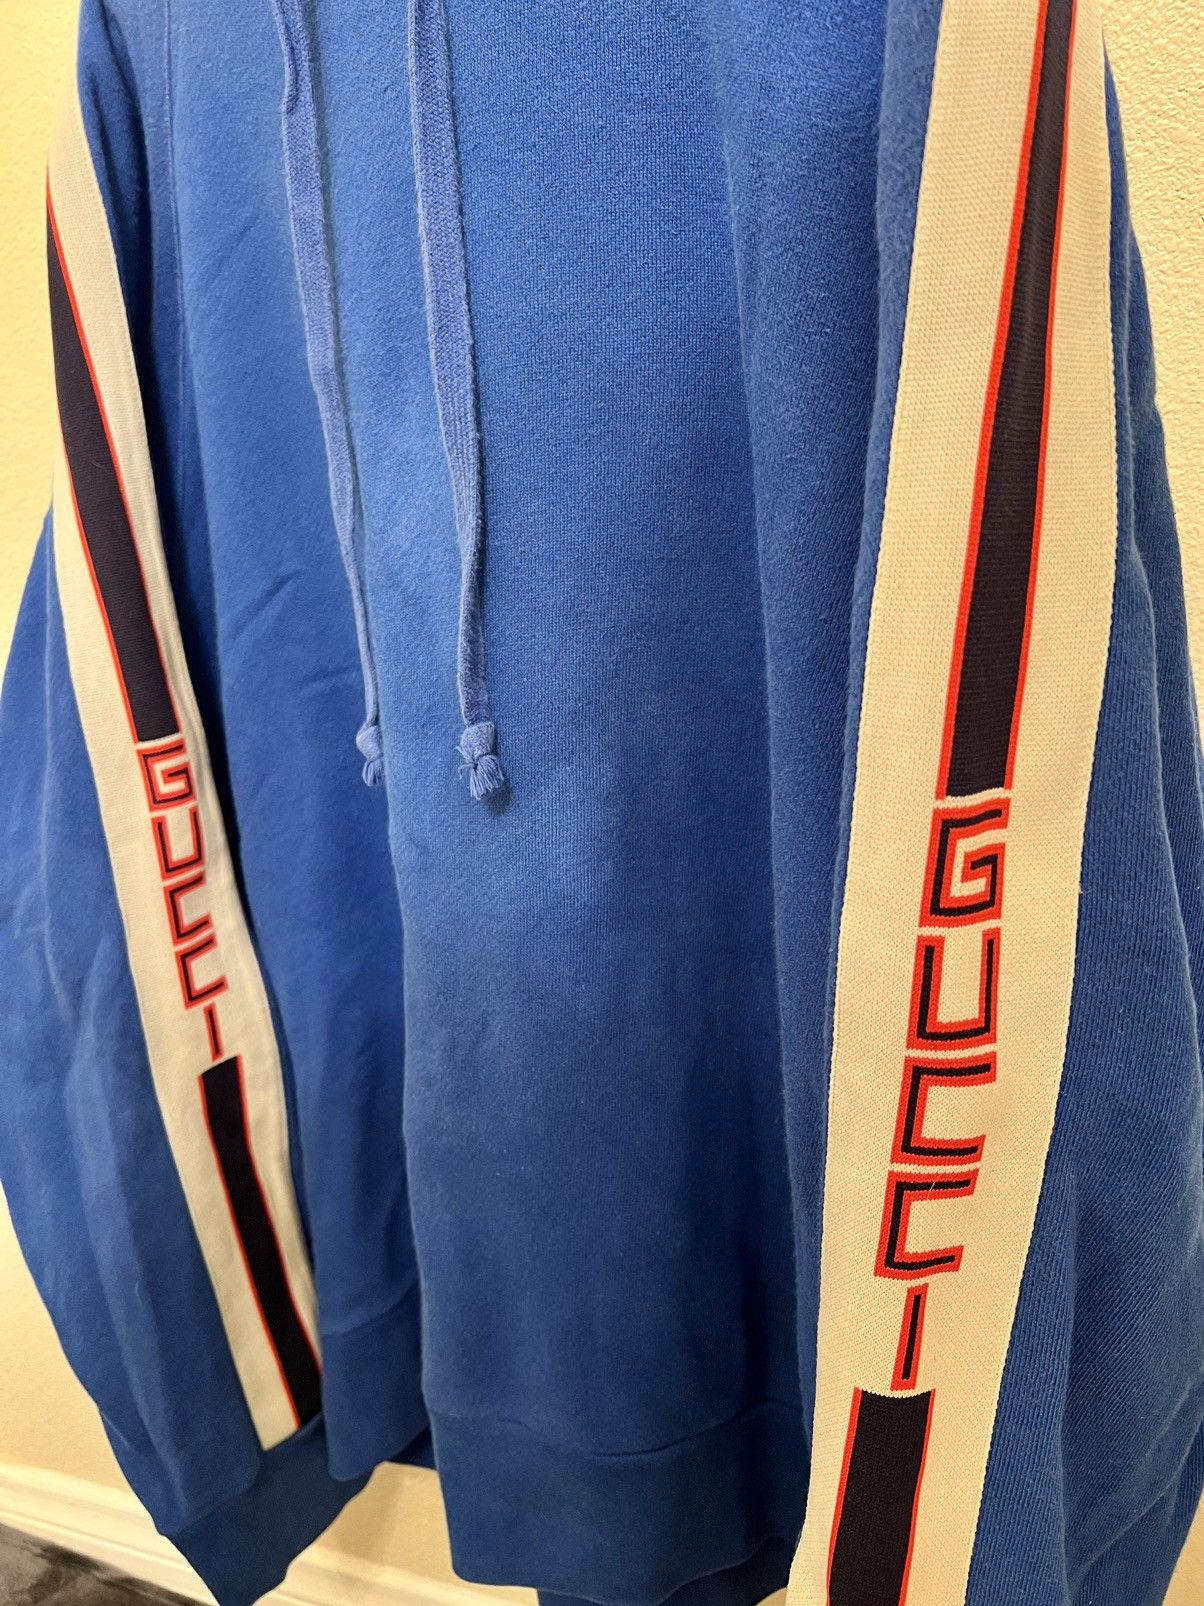 Gucci Authentic *Limited Edition* Blue Oversized Gucci Hoodie Size US XL / EU 56 / 4 - 4 Thumbnail